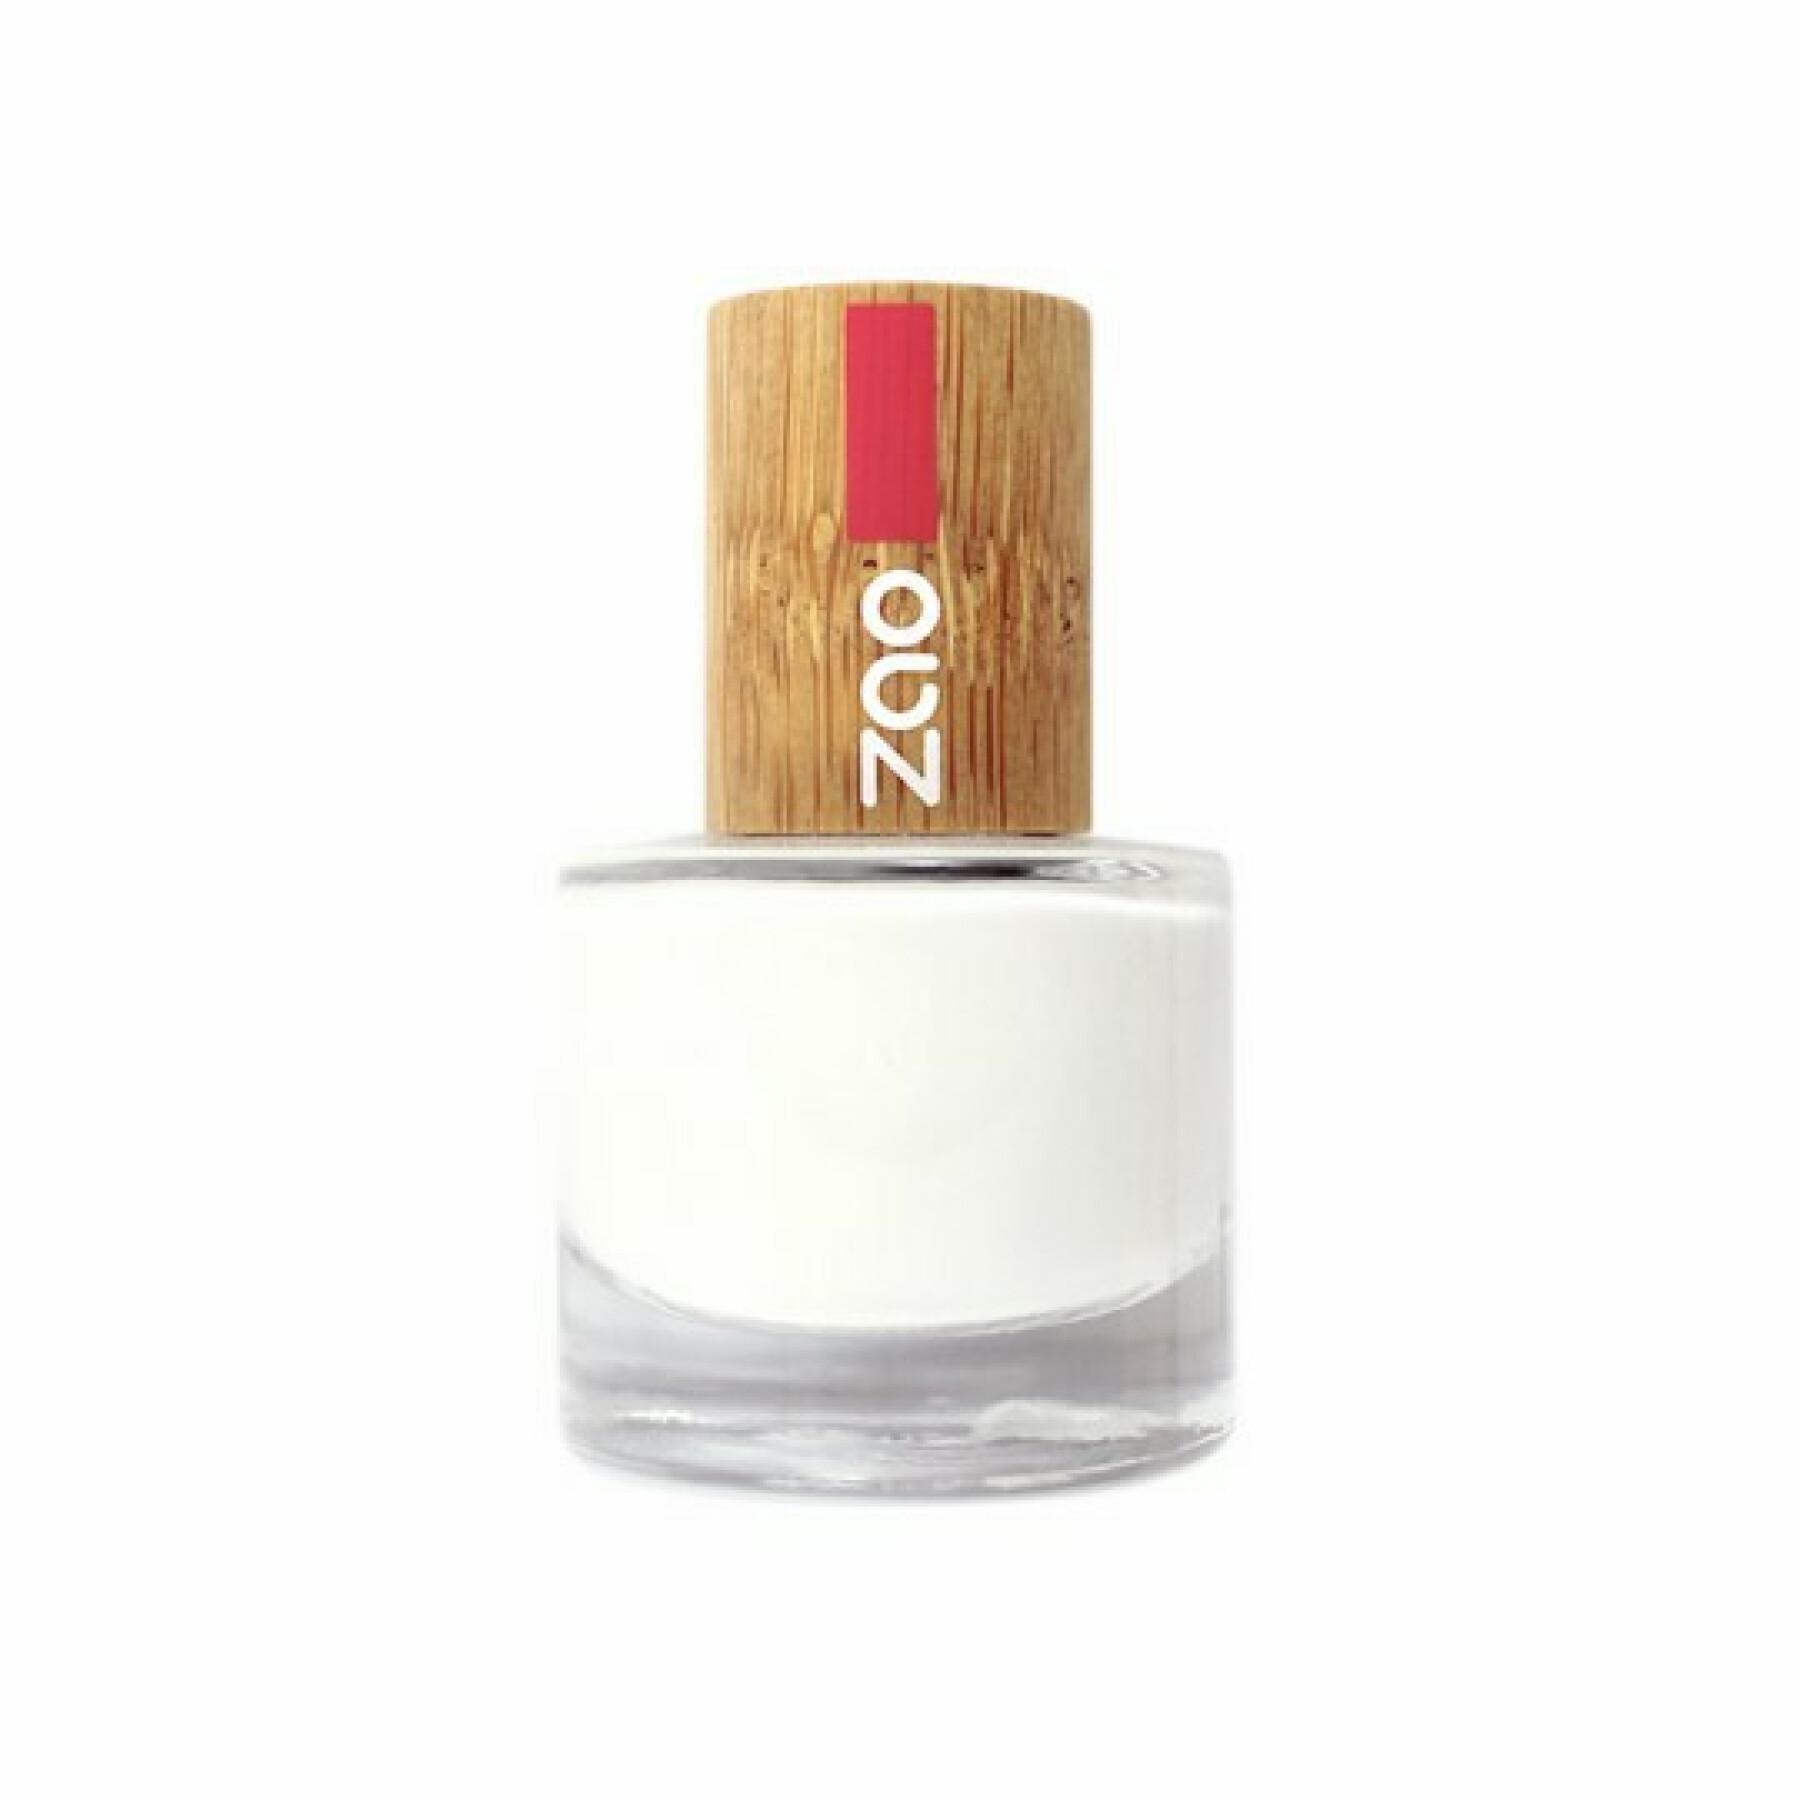 Vernis à ongles French manucure 641 blanc femme Zao - 8 ml